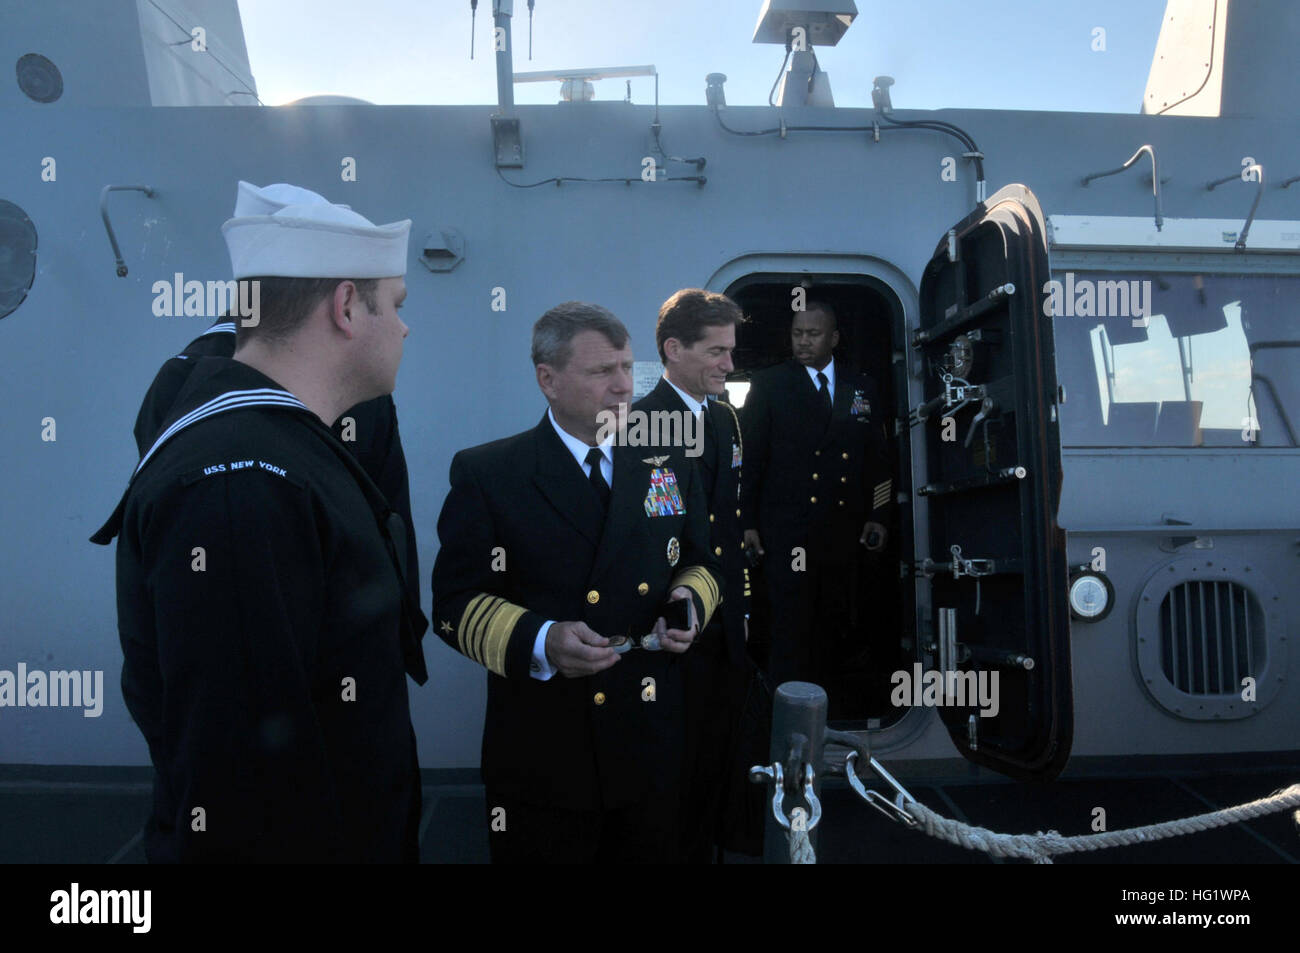 Adm. William Gortney, commander U.S. Fleet Forces Command, talks to sailors aboard amphibious transport dock ship USS New York (LPD 21). New York shifted home port to Naval Station Mayport, Fla., as part of a larger move of an amphibious ready group home port change in support of strategic maritime dispersal. (U.S. Navy photo by Mass Communication Specialist 3rd Class Angus Beckles/Released) USS New York arrives at Mayport 131206-N-GC472-046 Stock Photo